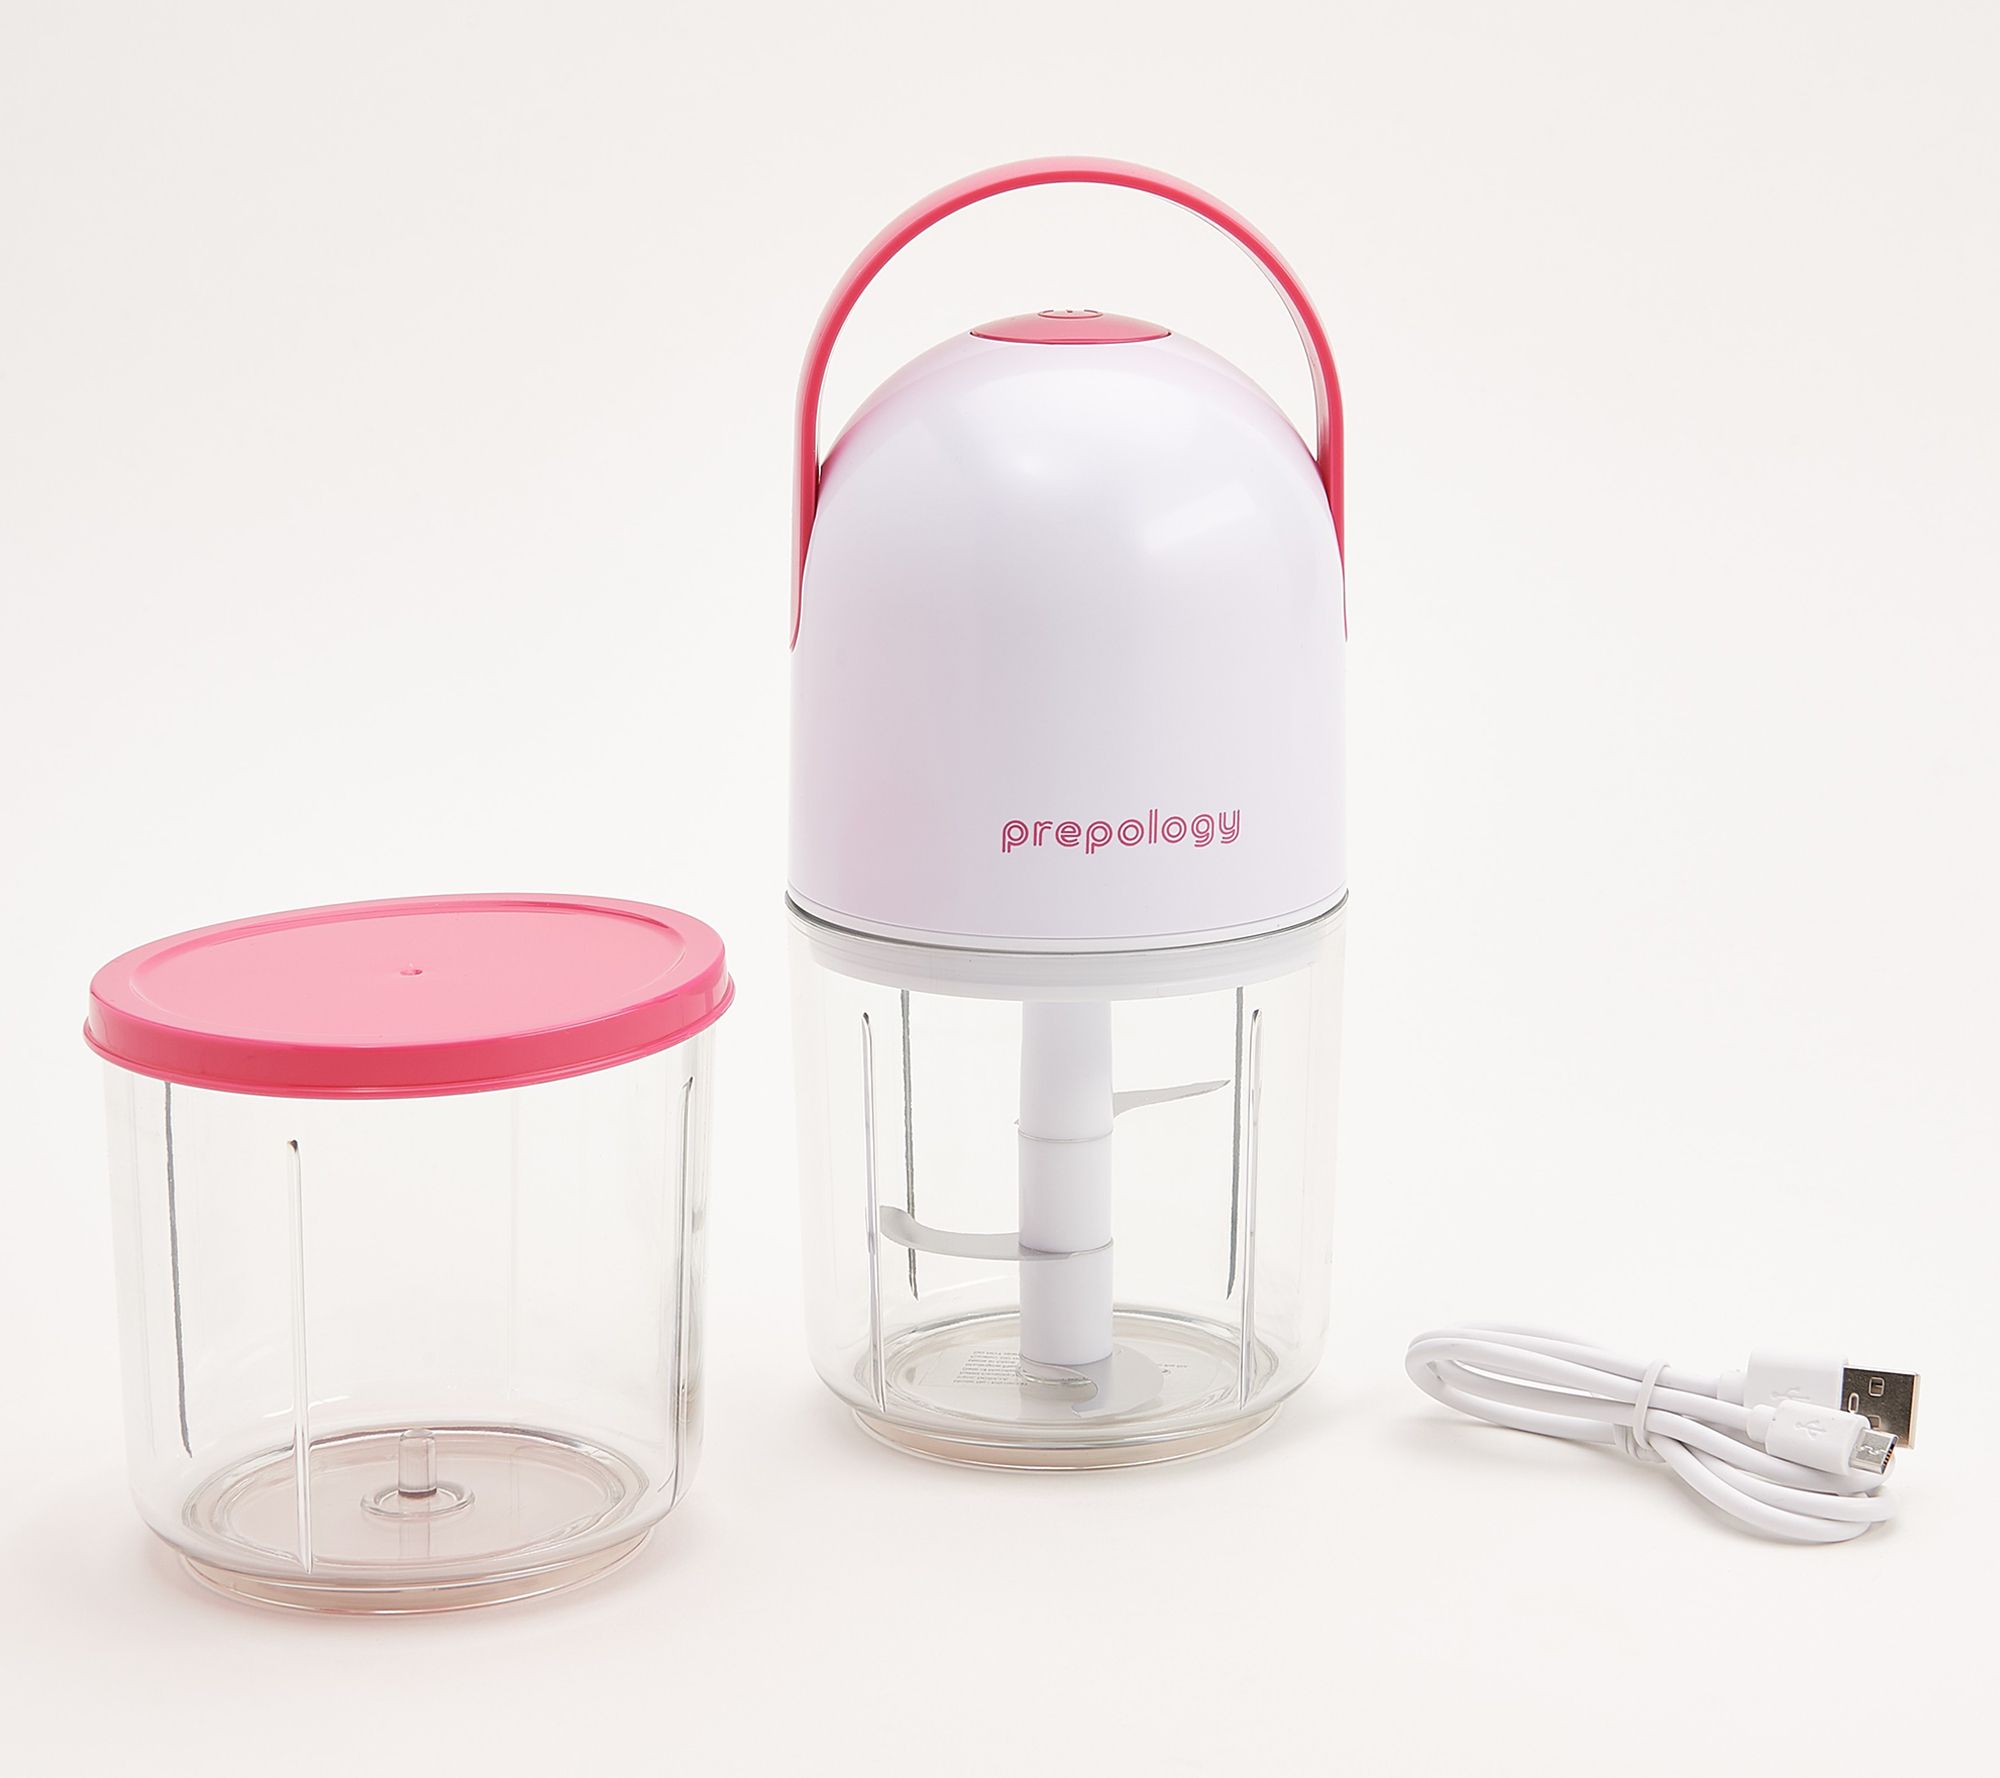 Portable Mini Electric Food Grinder And Chopper - Inspire Uplift